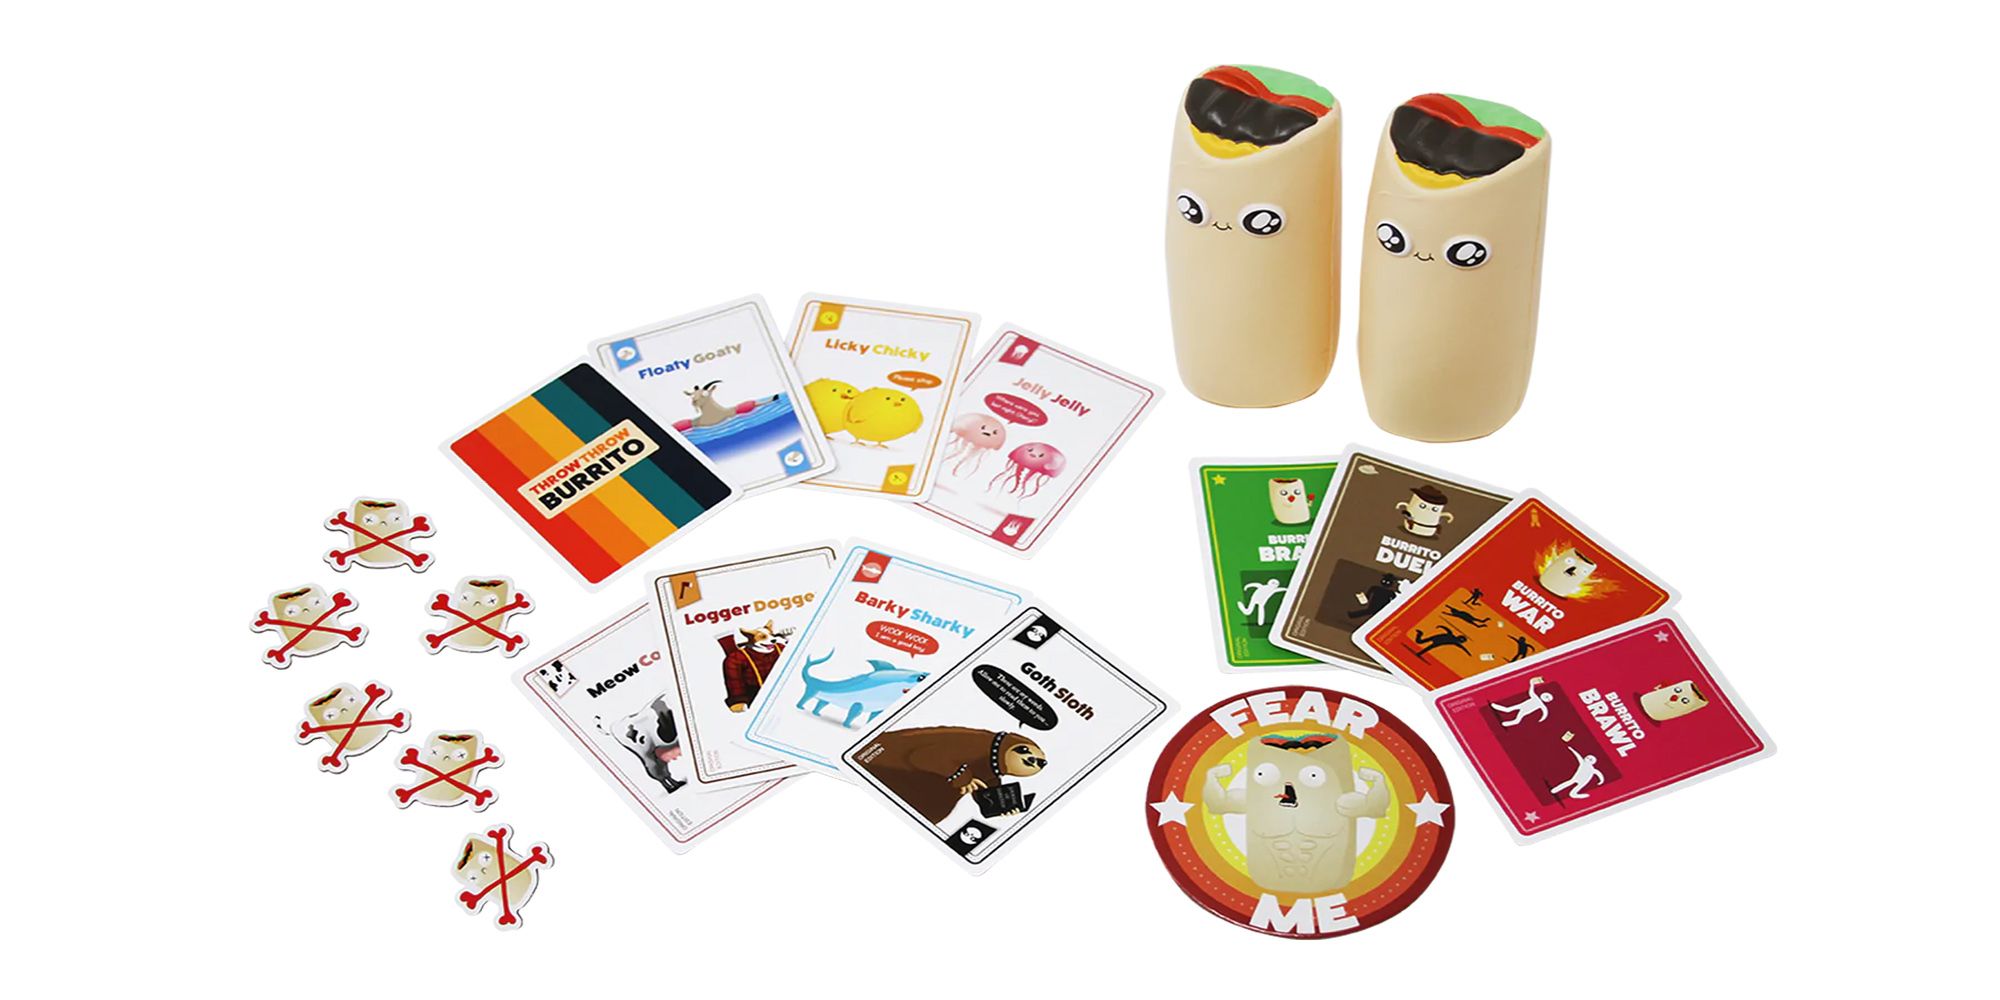 The contents of Throw Throw Burrito, including two soft burritos, playing cards, hit tokens, and the "FEAR ME" badge.